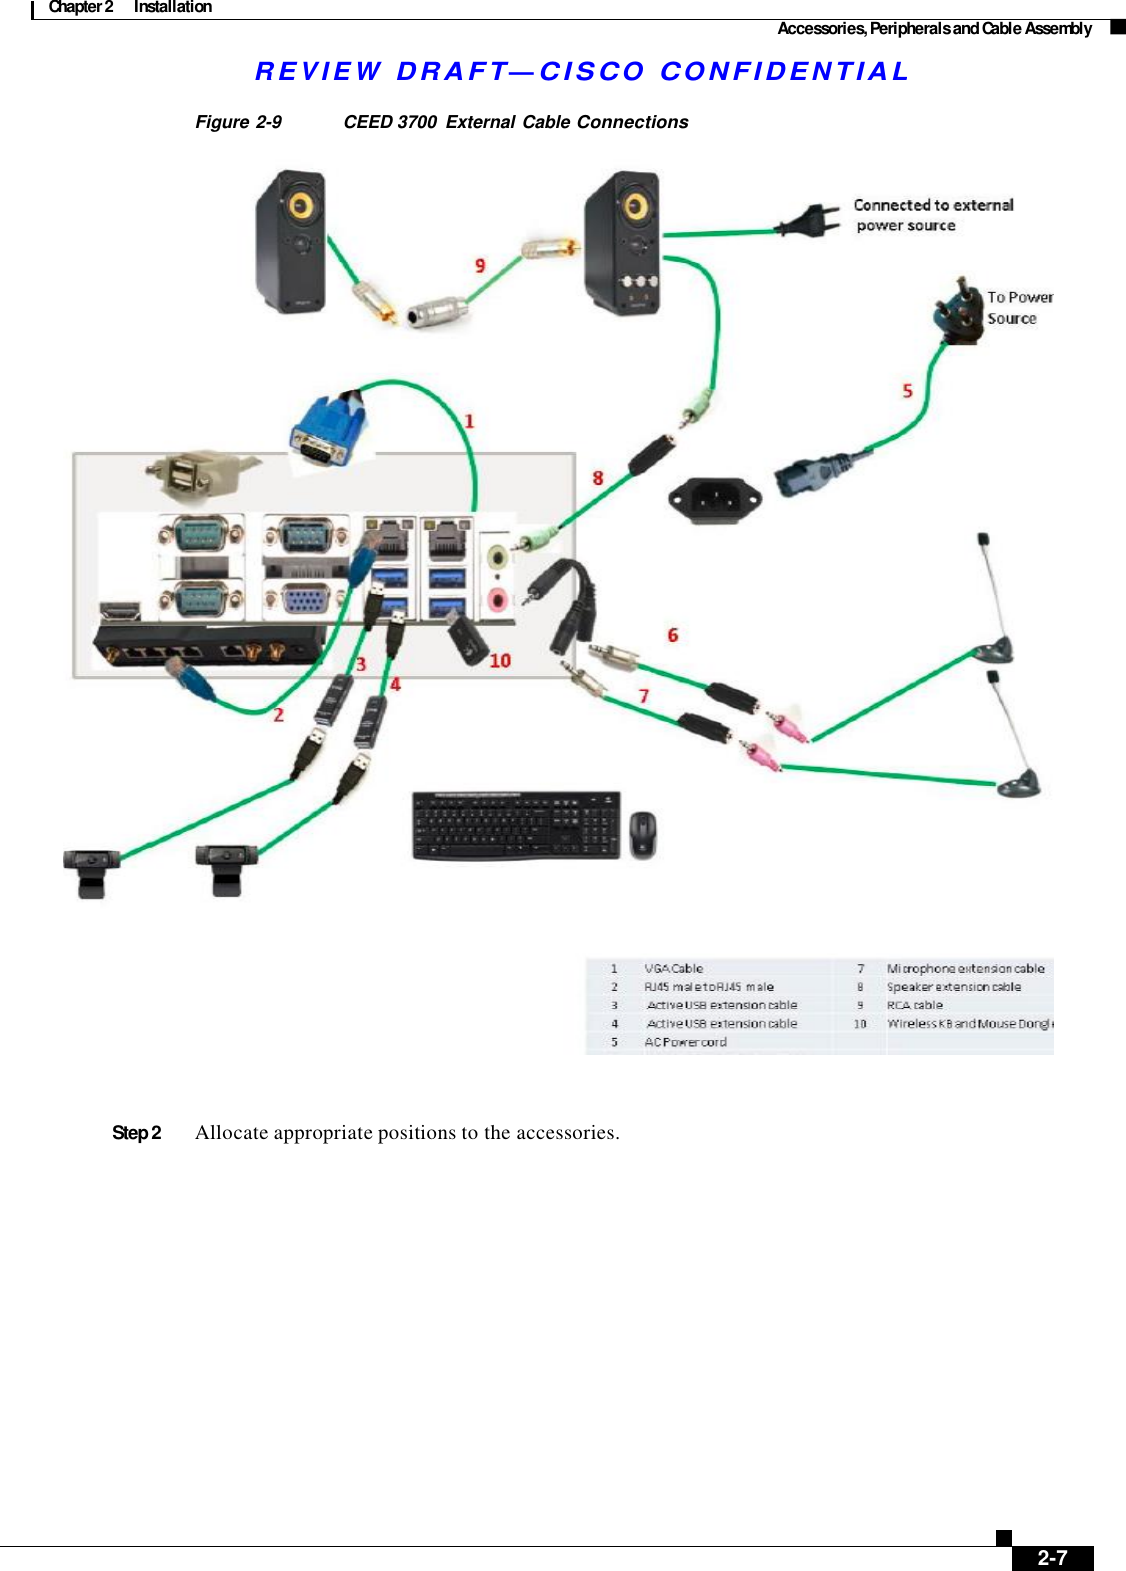 Chapter 2  Installation Accessories, Peripherals and Cable Assembly R E V I E W  DR AFT — CISC O  C O NF IDE N TIAL       Figure 2-9   CEED 3700  External Cable Connections     Step 2  Allocate appropriate positions to the accessories.                 2-7 